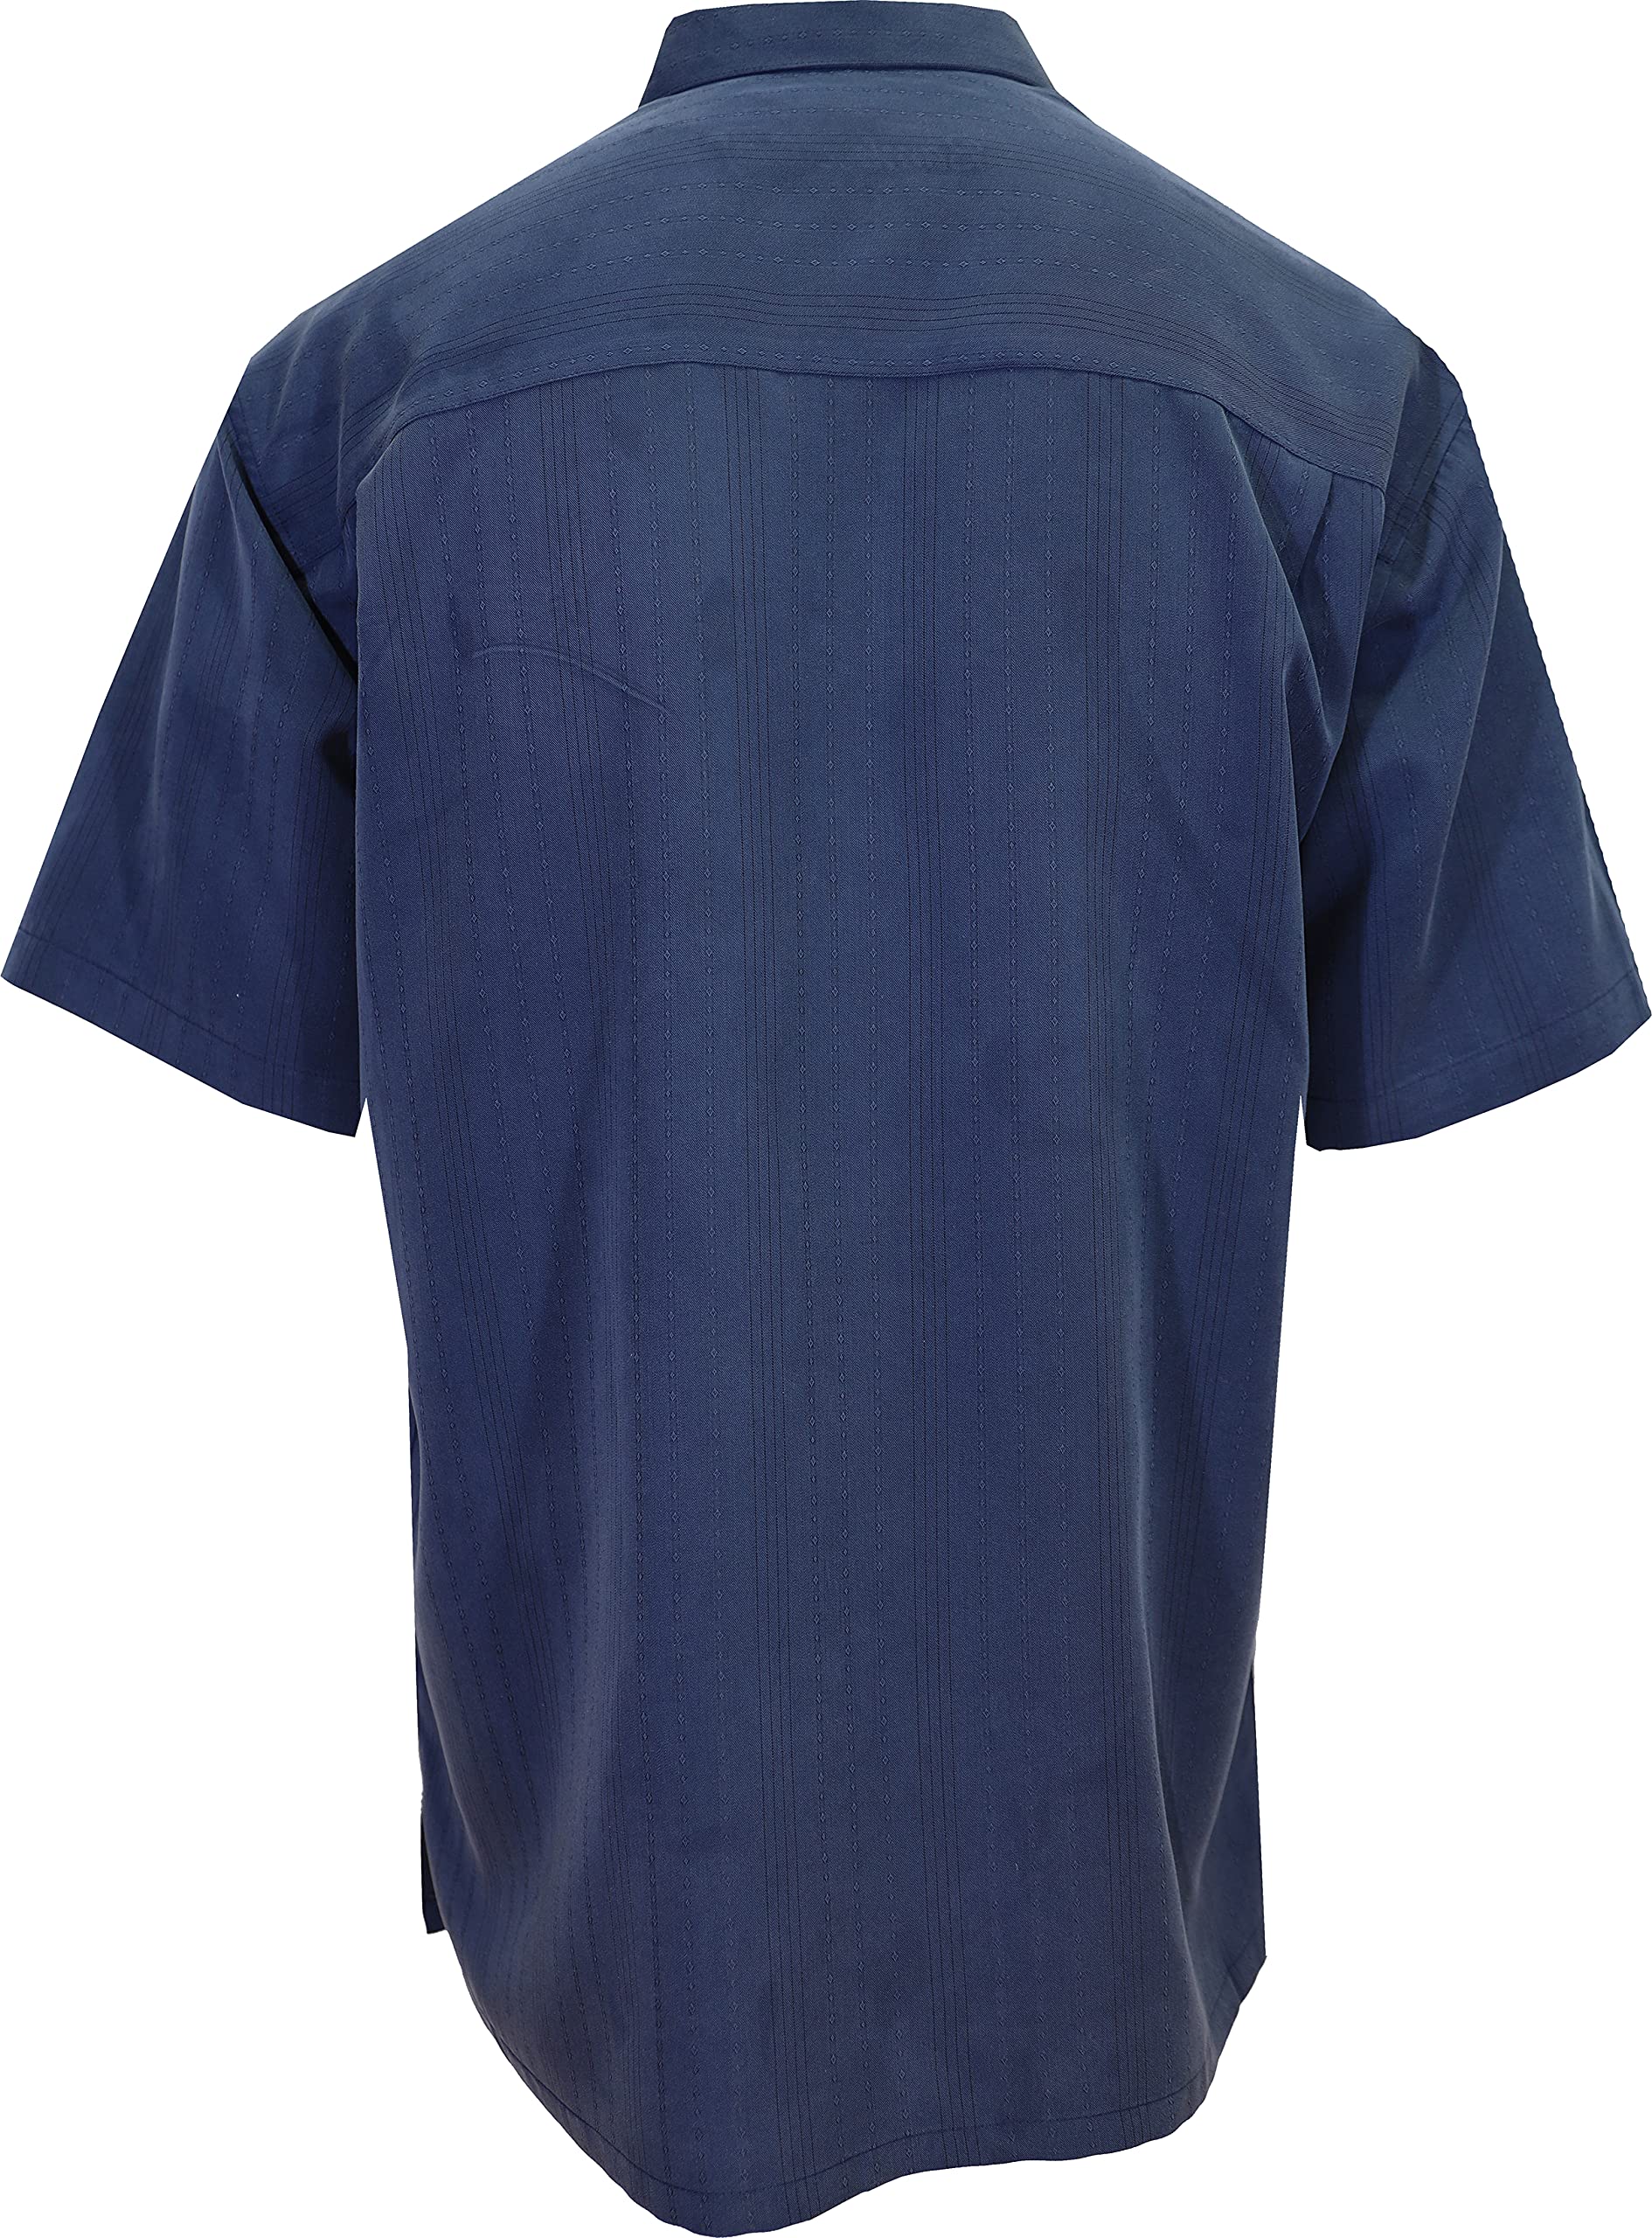 Bamboo Cay Men's Relaxed-fit Short-Sleeve Camp Shirt